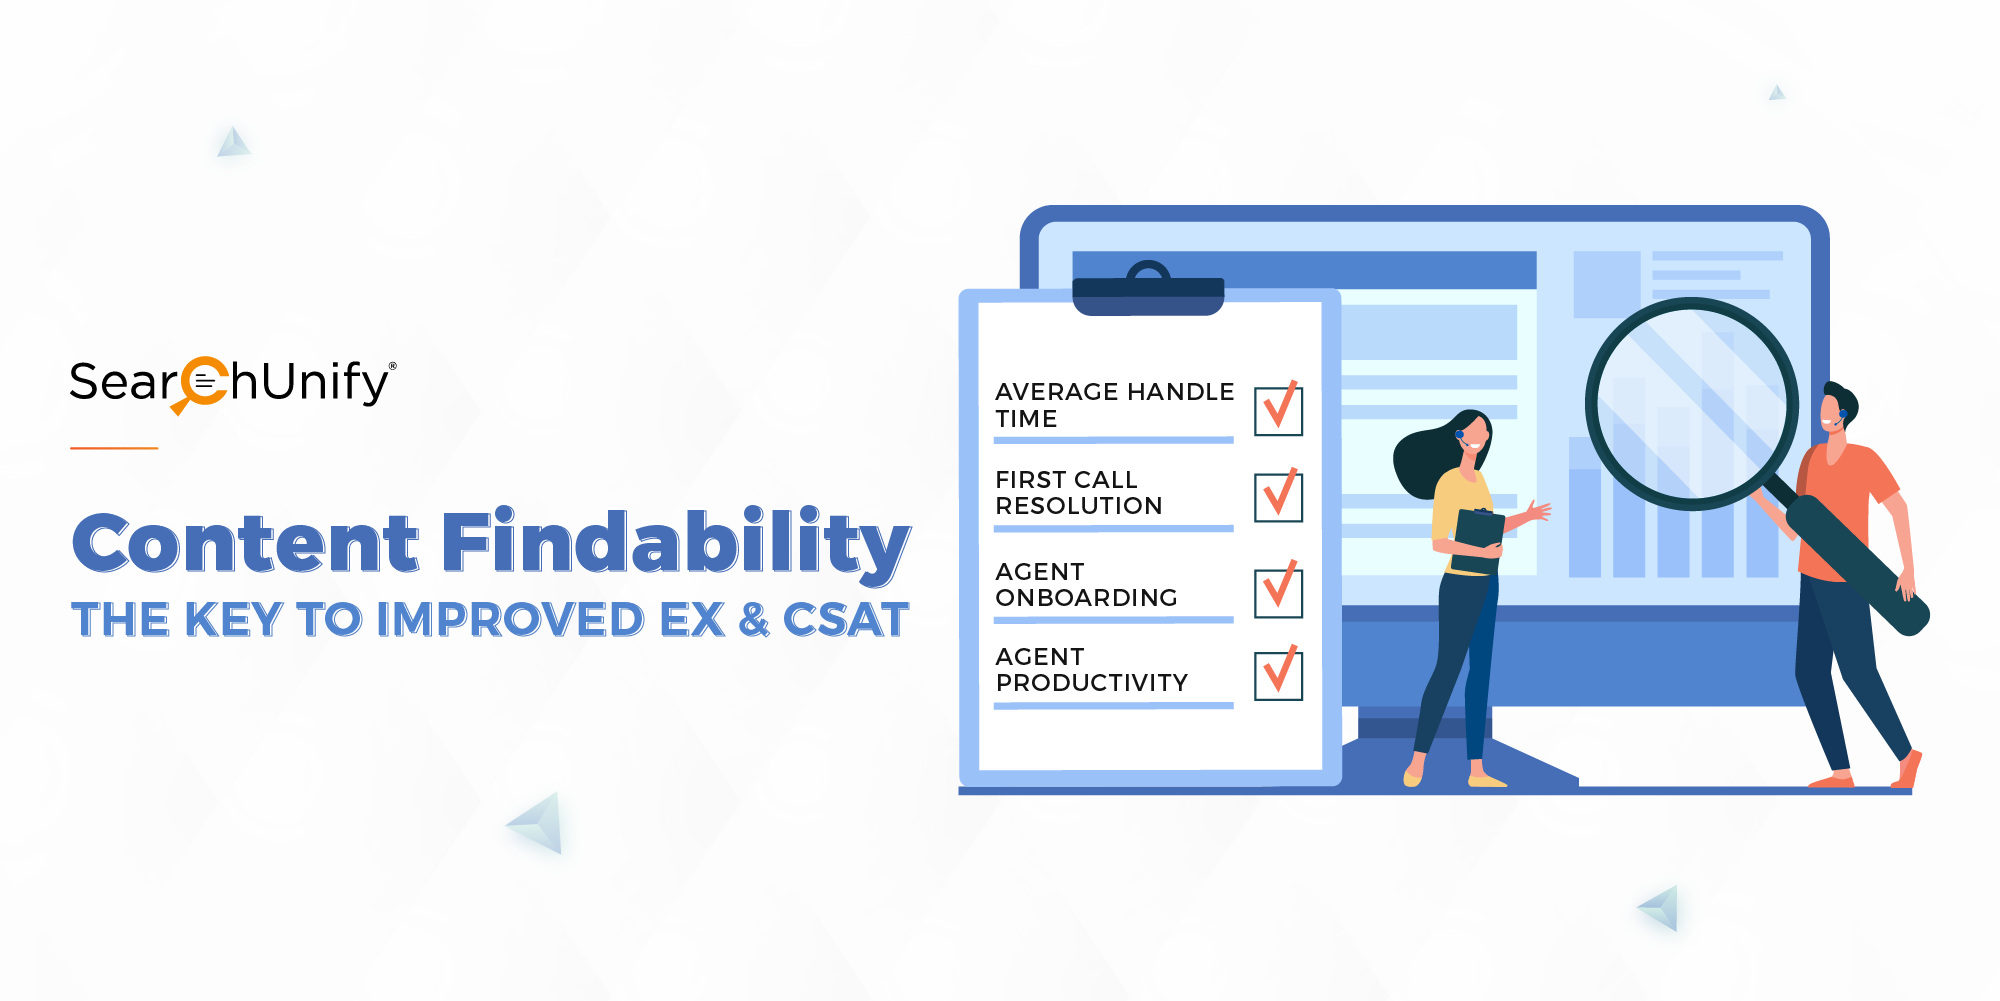 Content Findability: The Key to Improved EX & CSAT